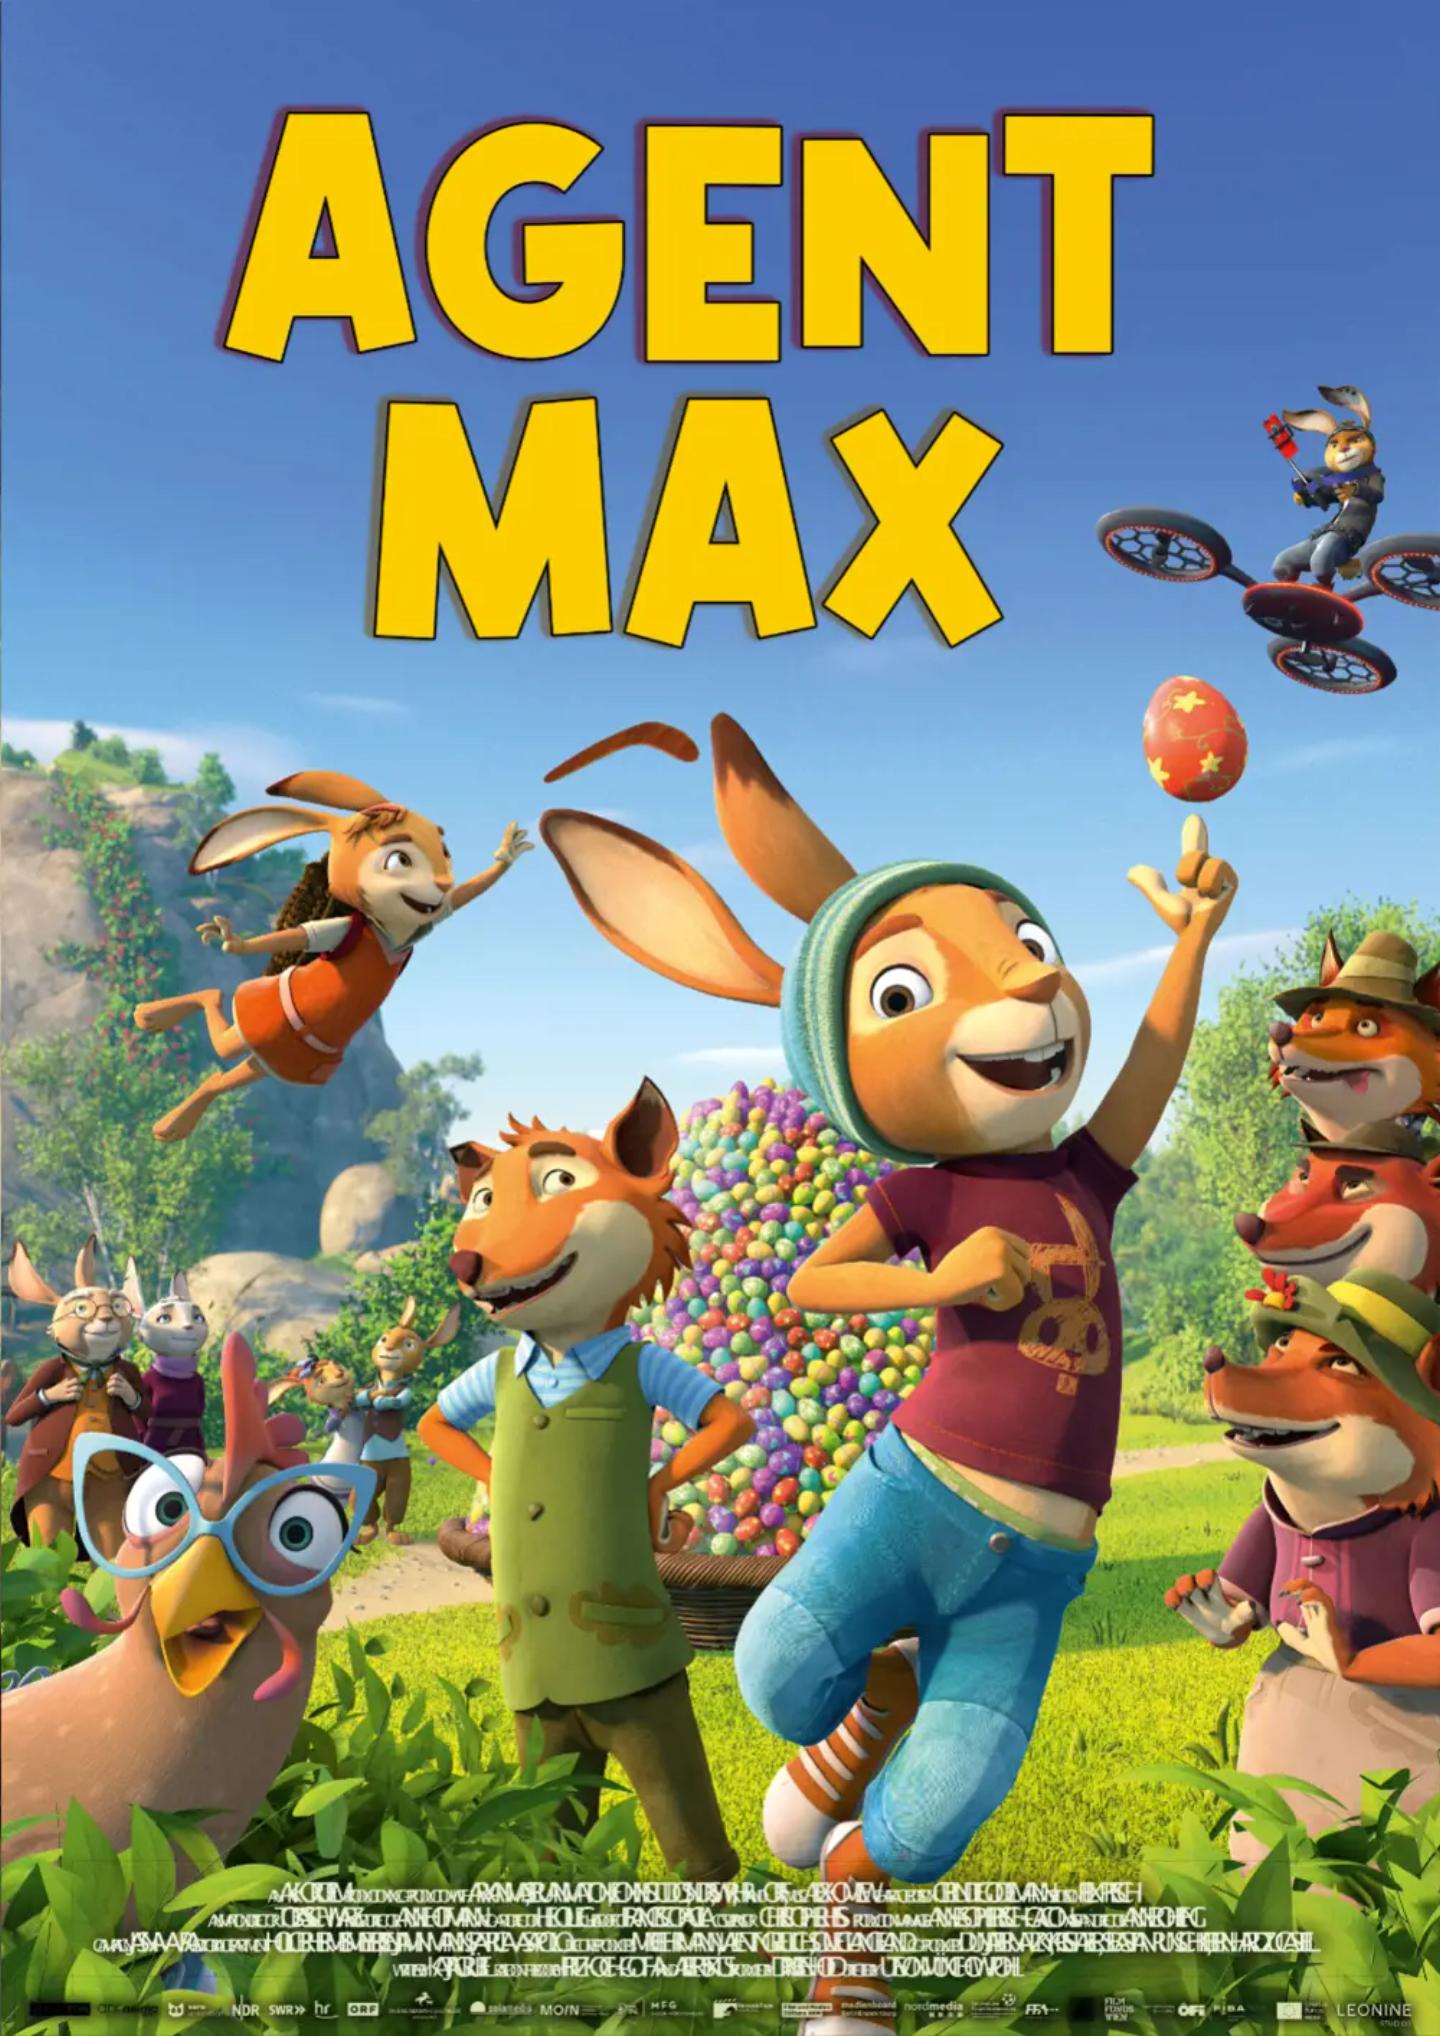 Plakat for 'Agent Max'